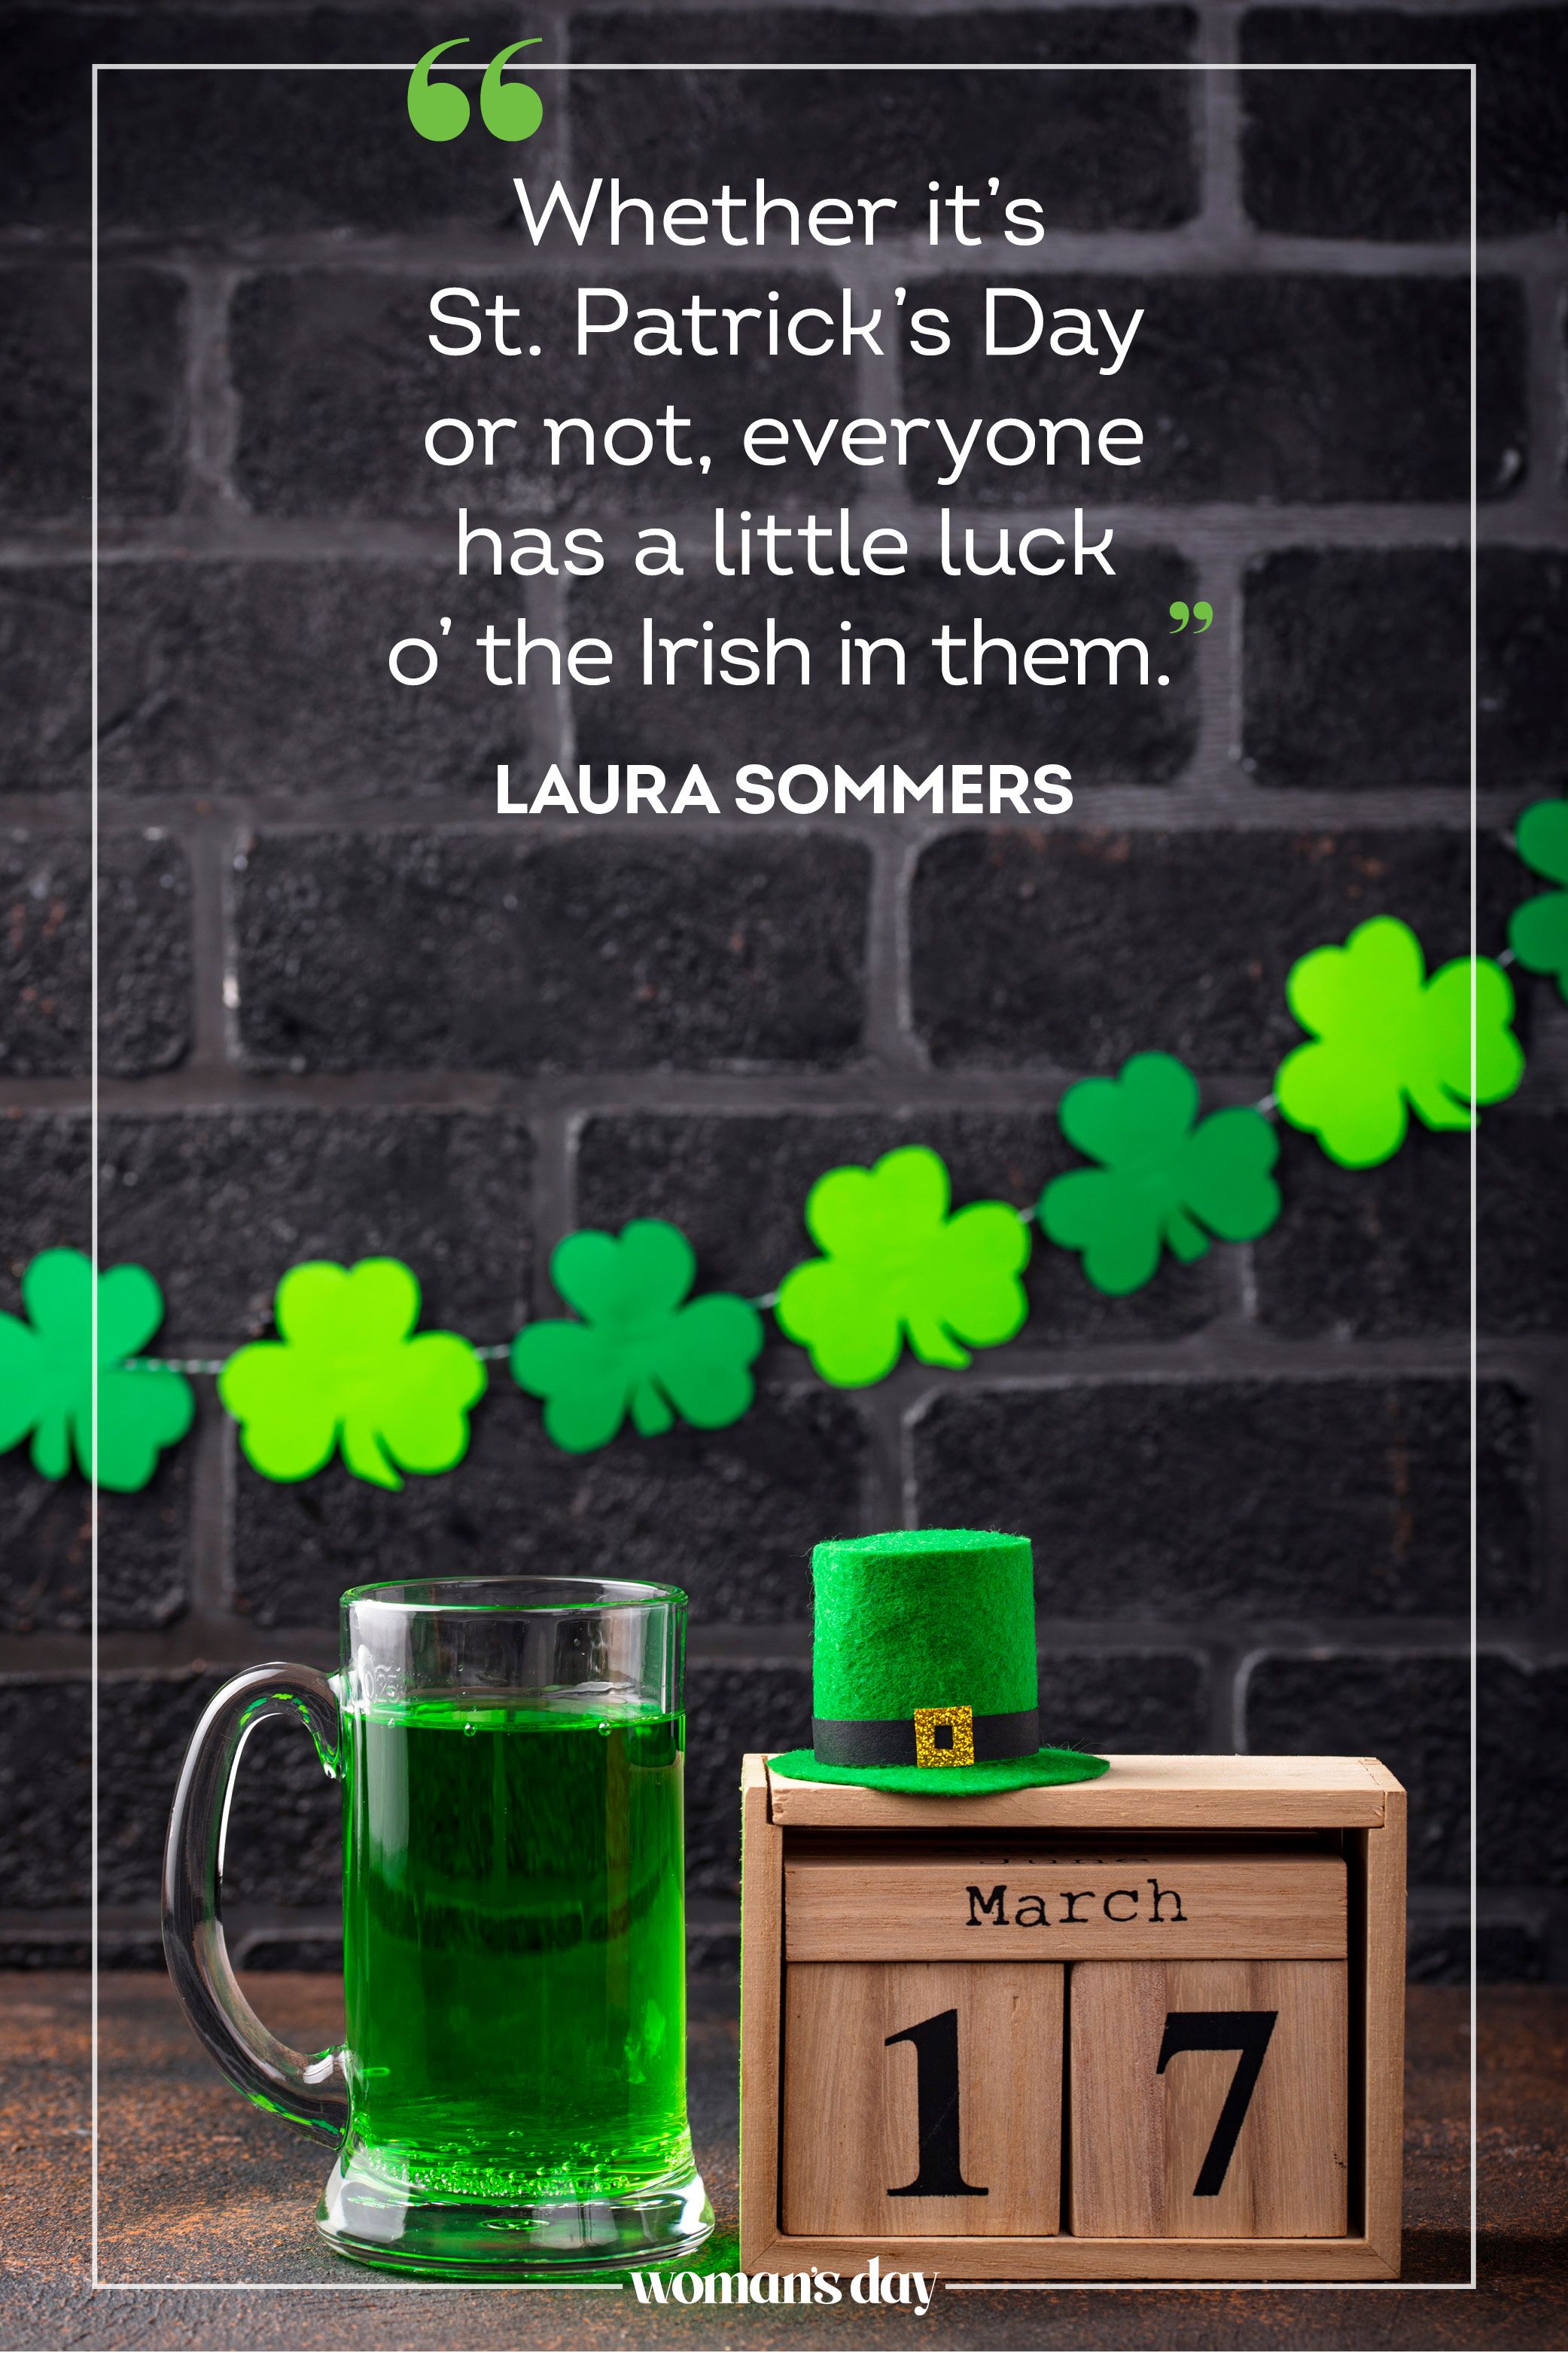 40 Best St. Patrick's Day Quotes - Irish Sayings for St. Paddy's Day